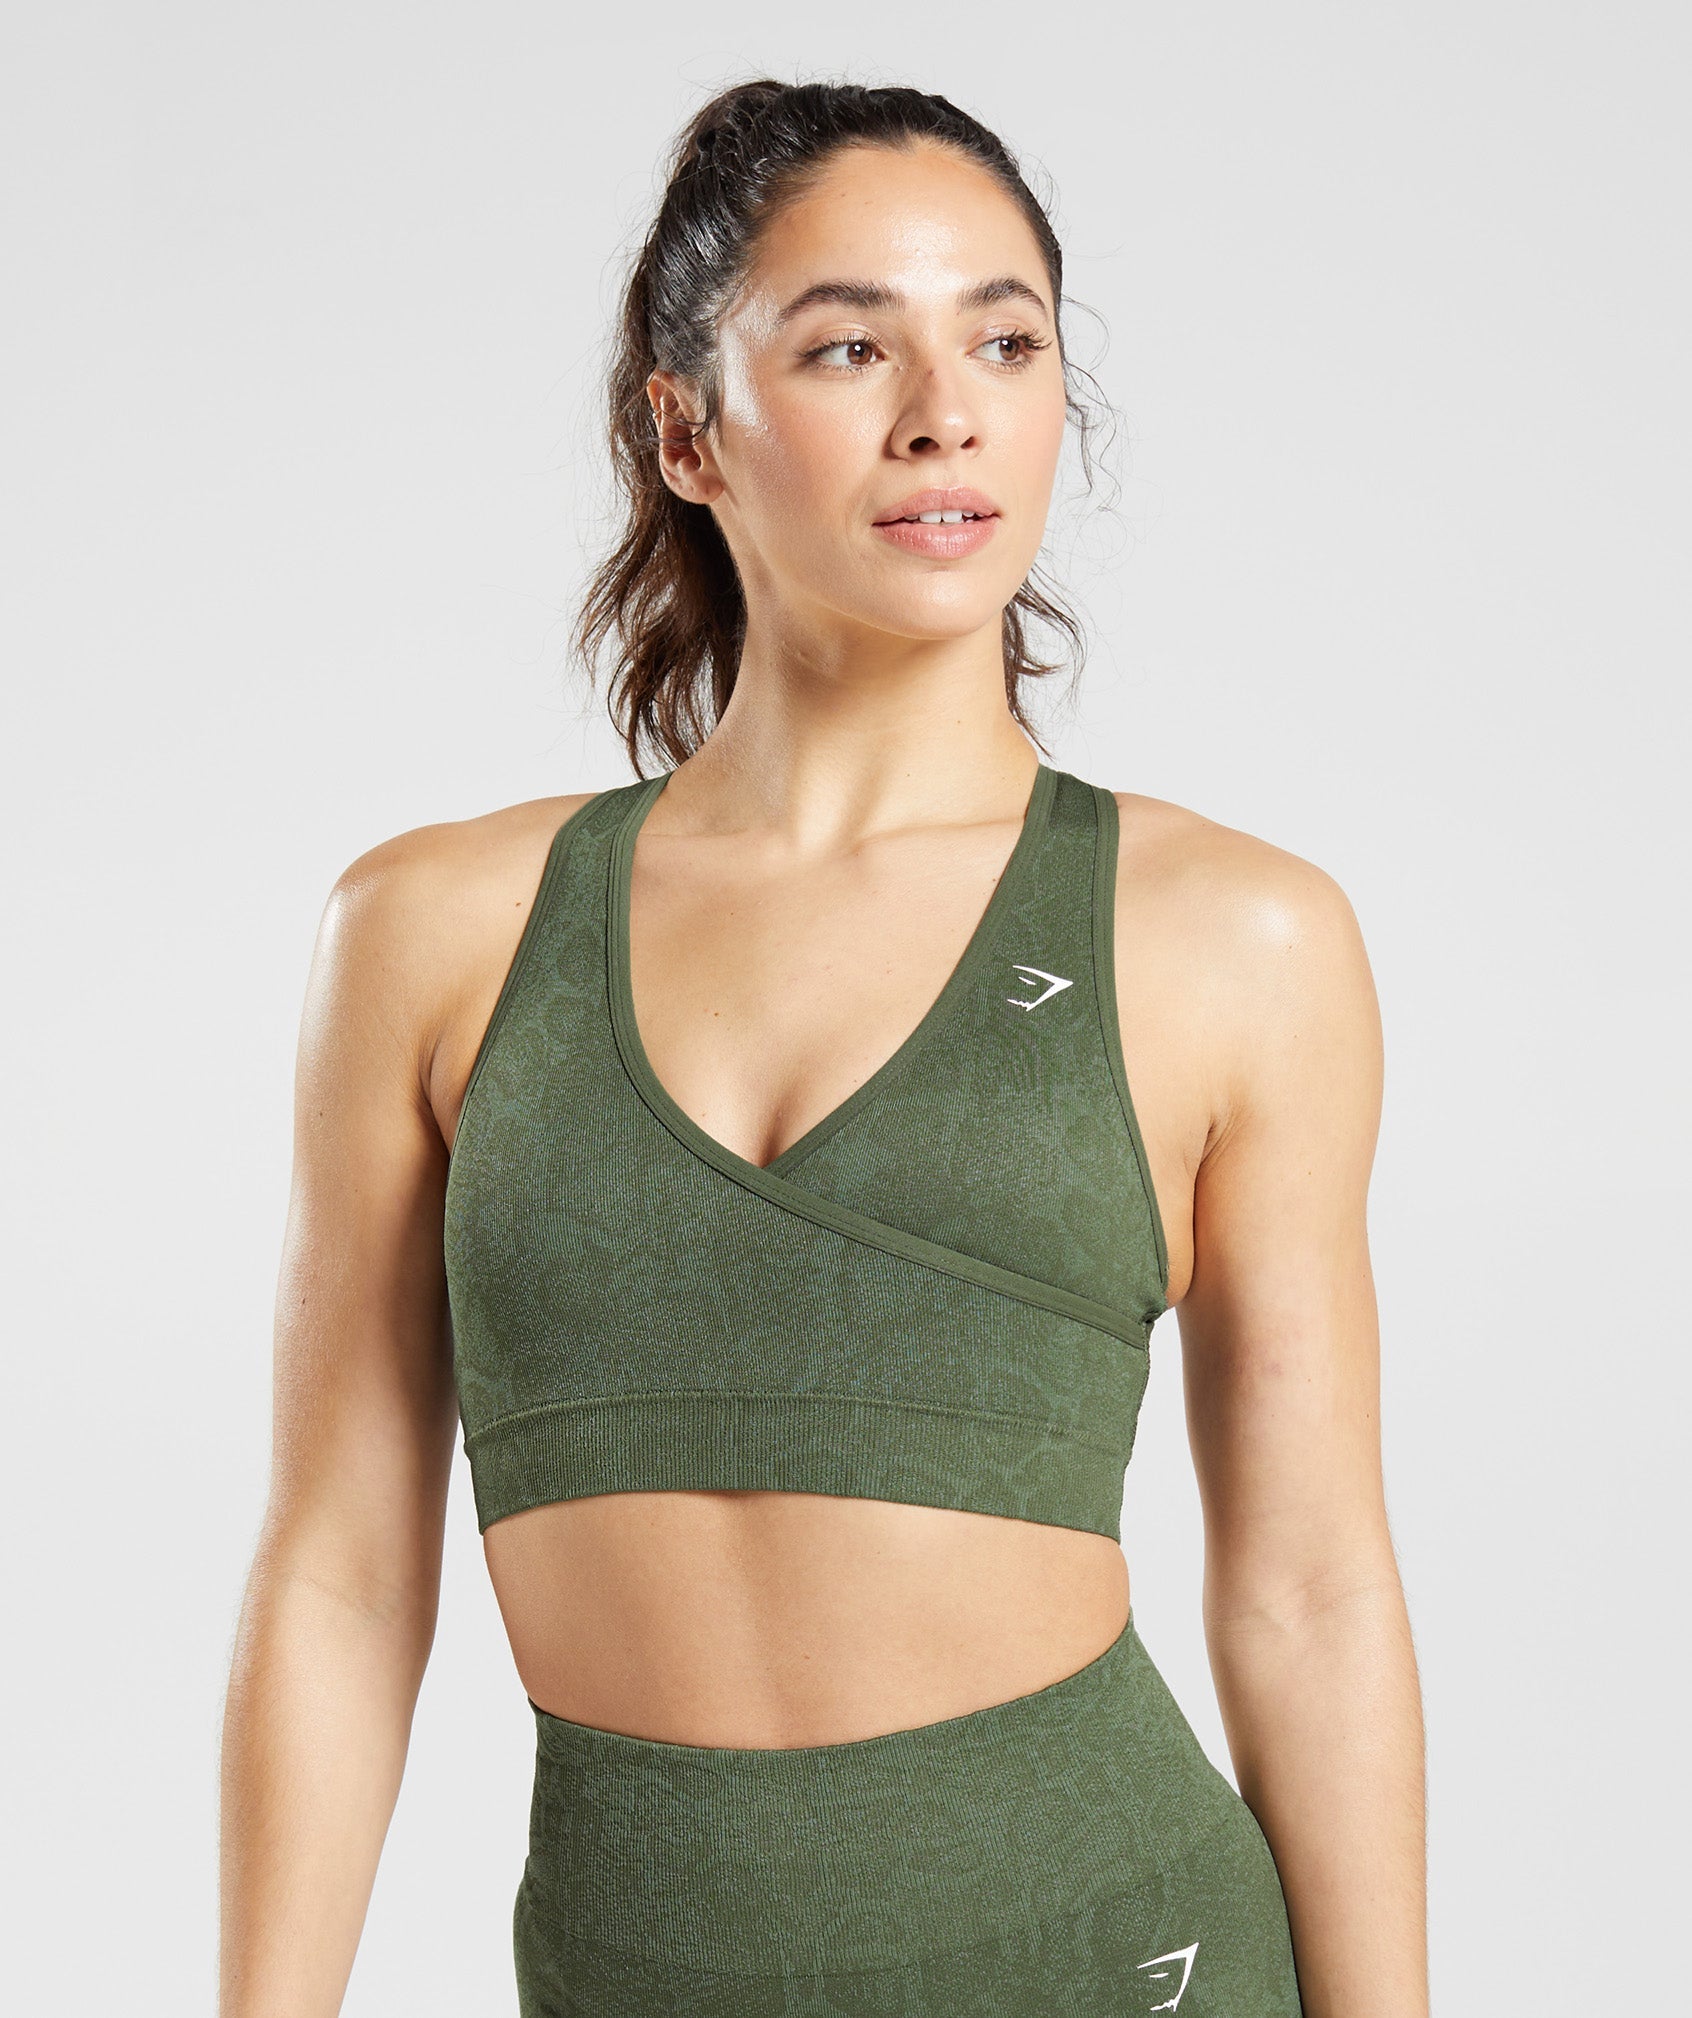 Gymshark's Can't-Miss Sale Has $15 Sports Bras, $22 Leggings & More